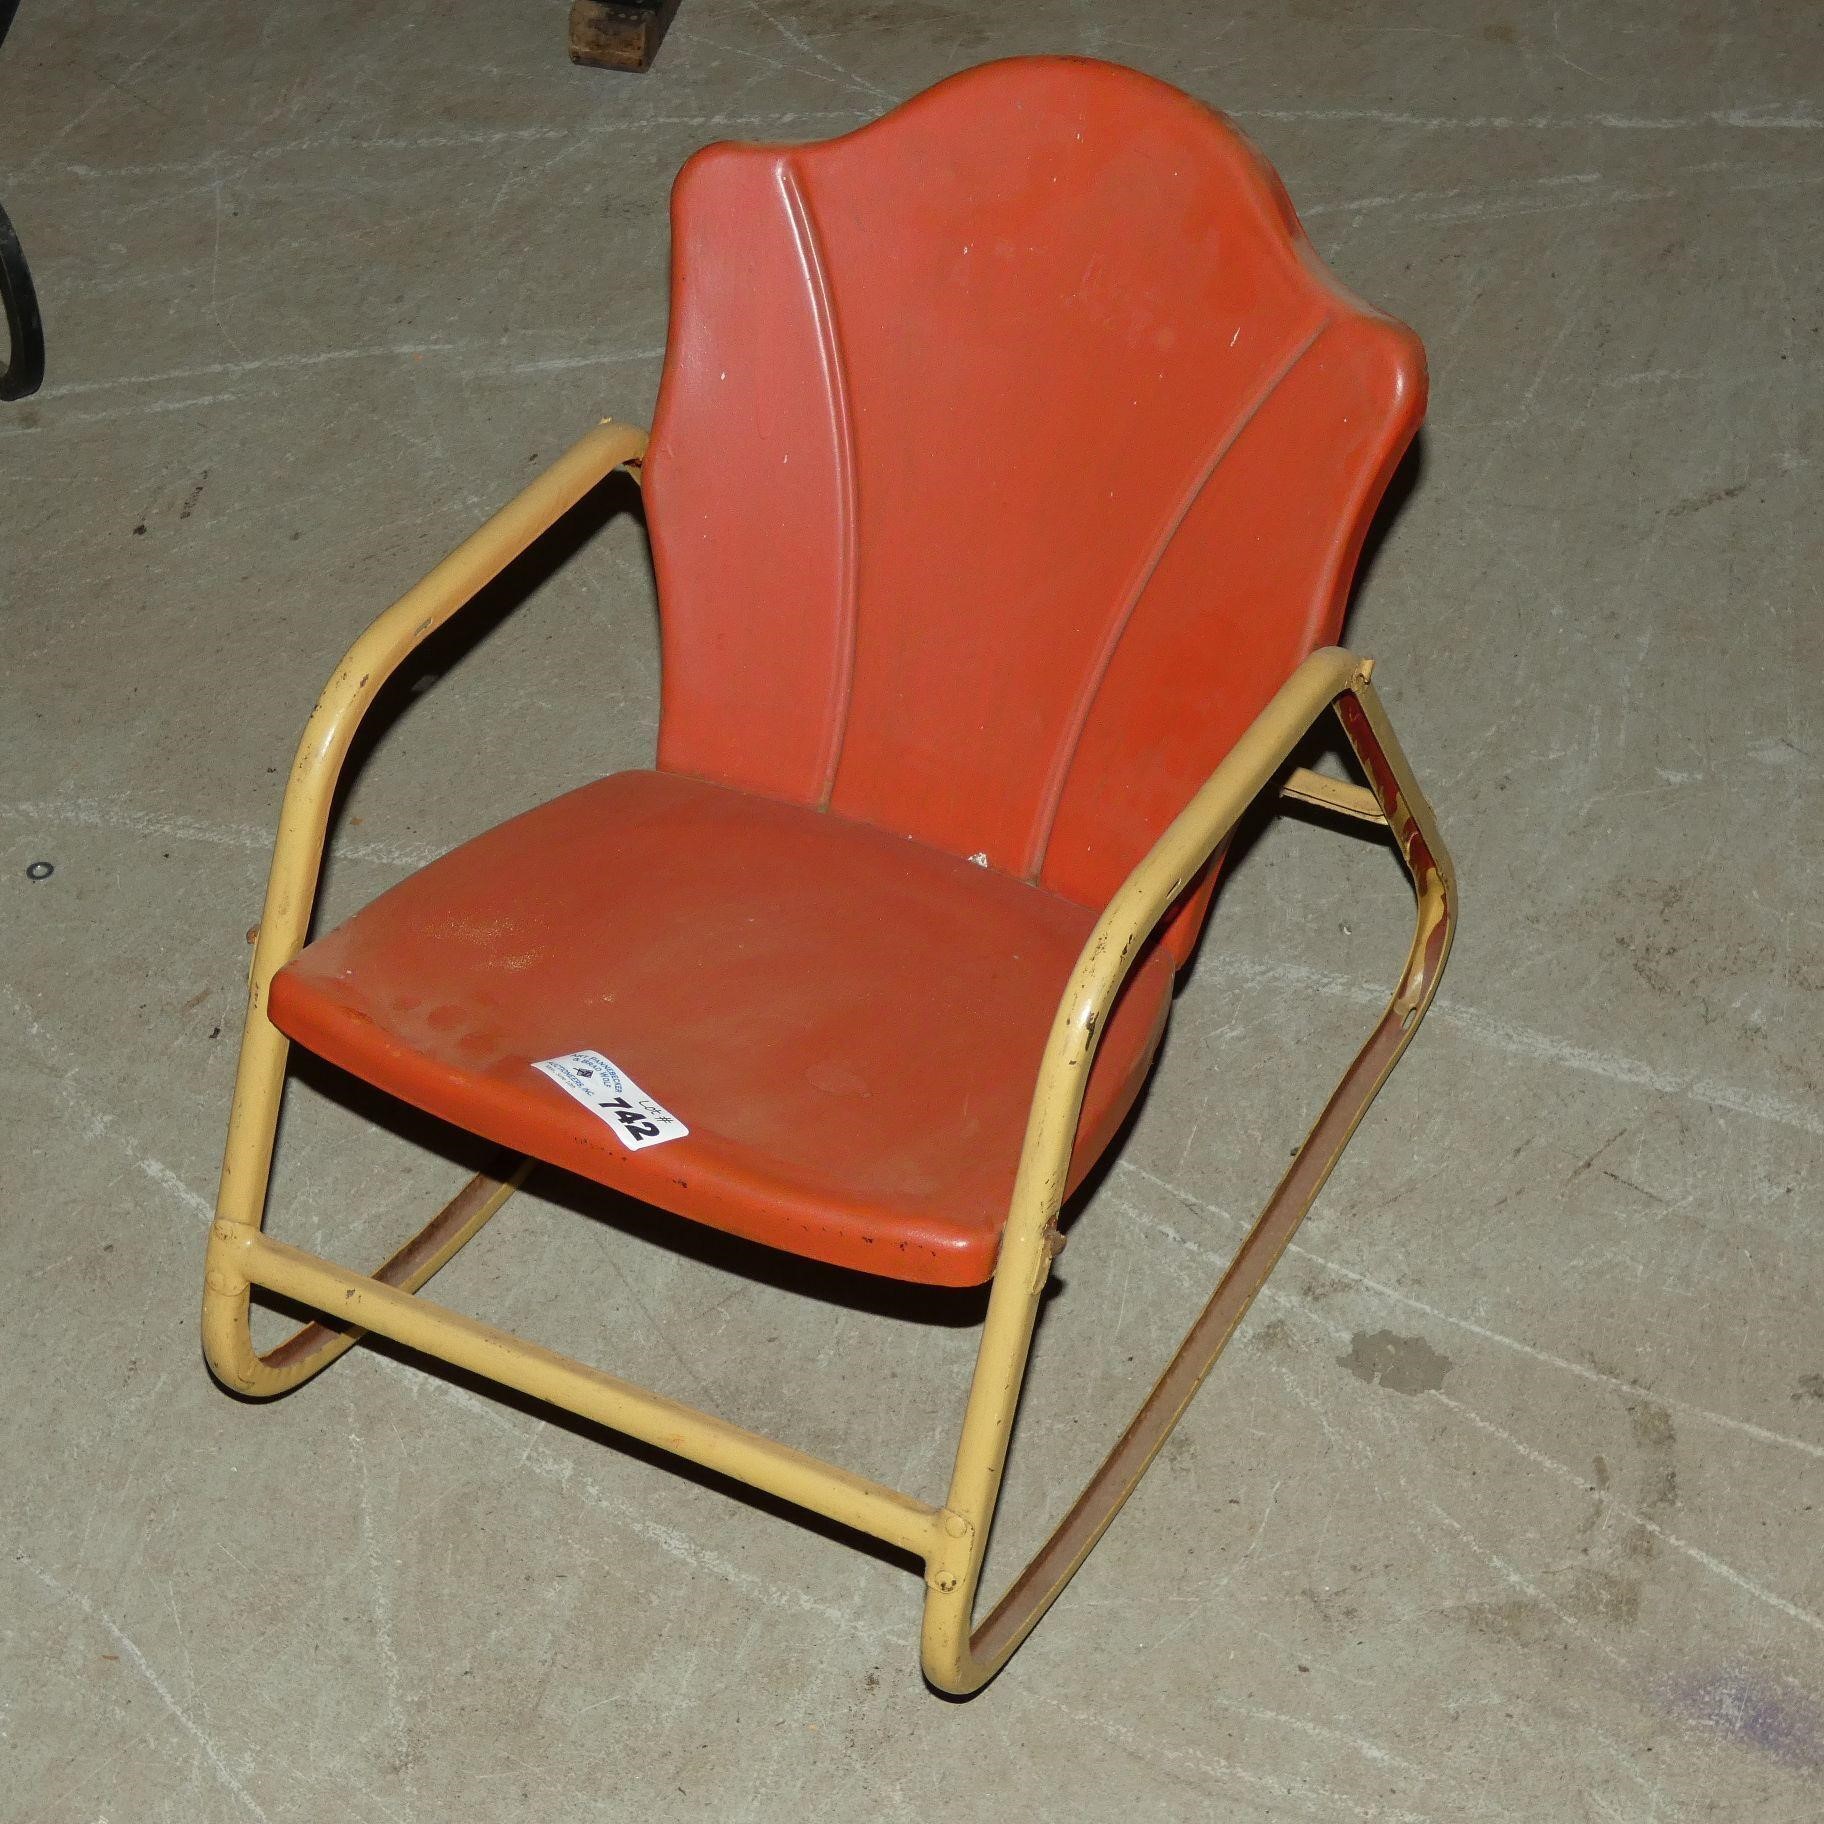 Metal Childs Patio Chair